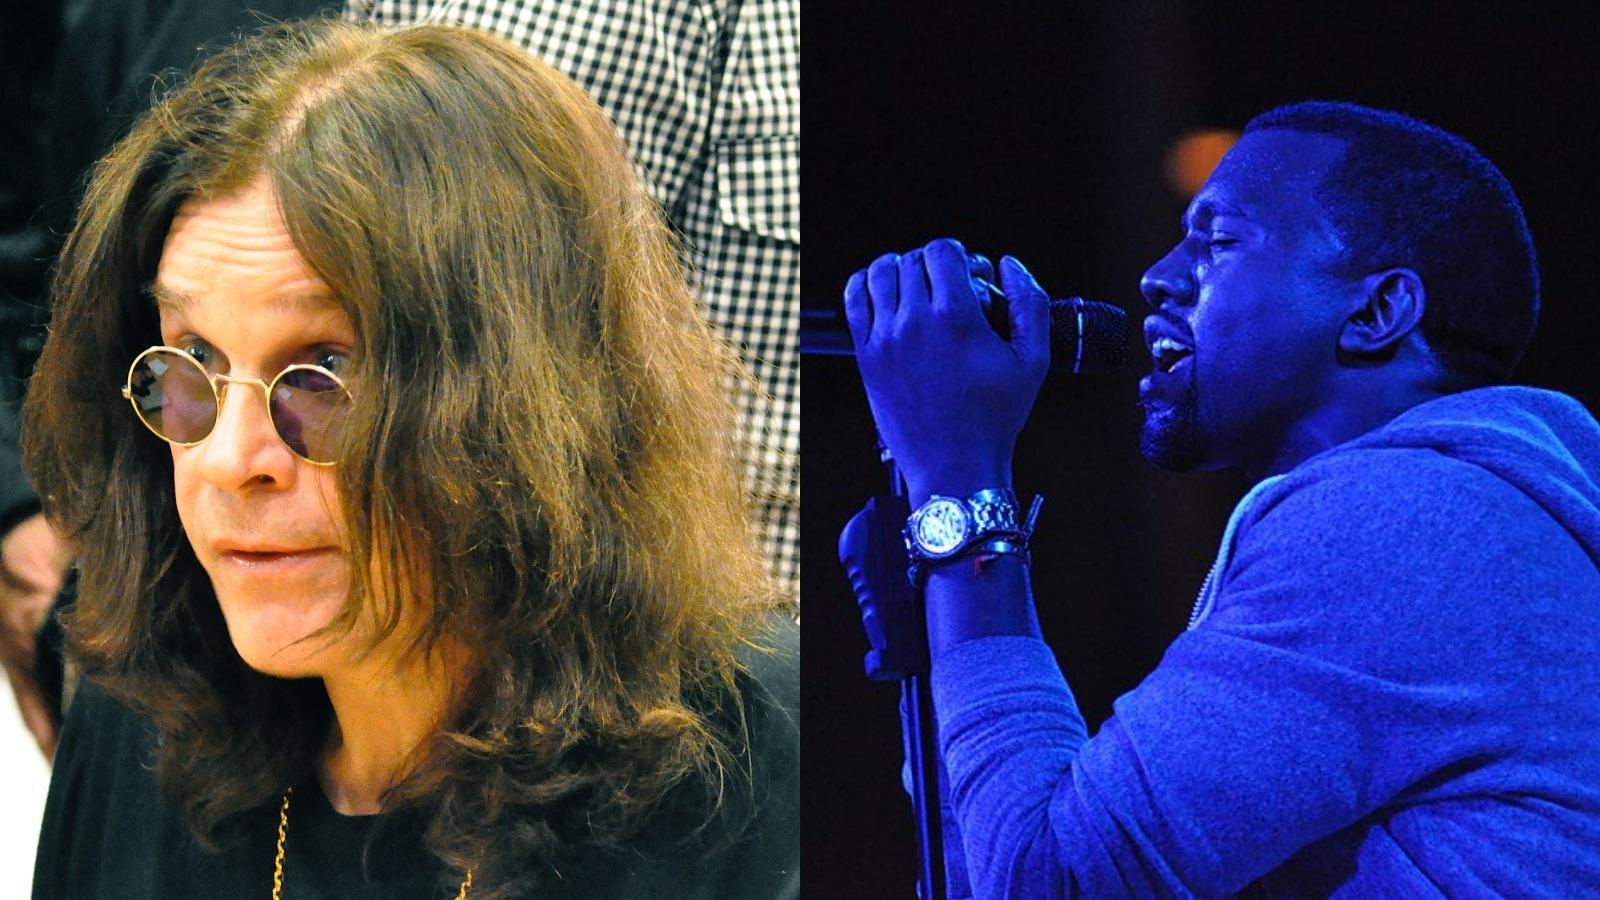 Ozzy Osbourne and Kanye West in a side-by-side photo